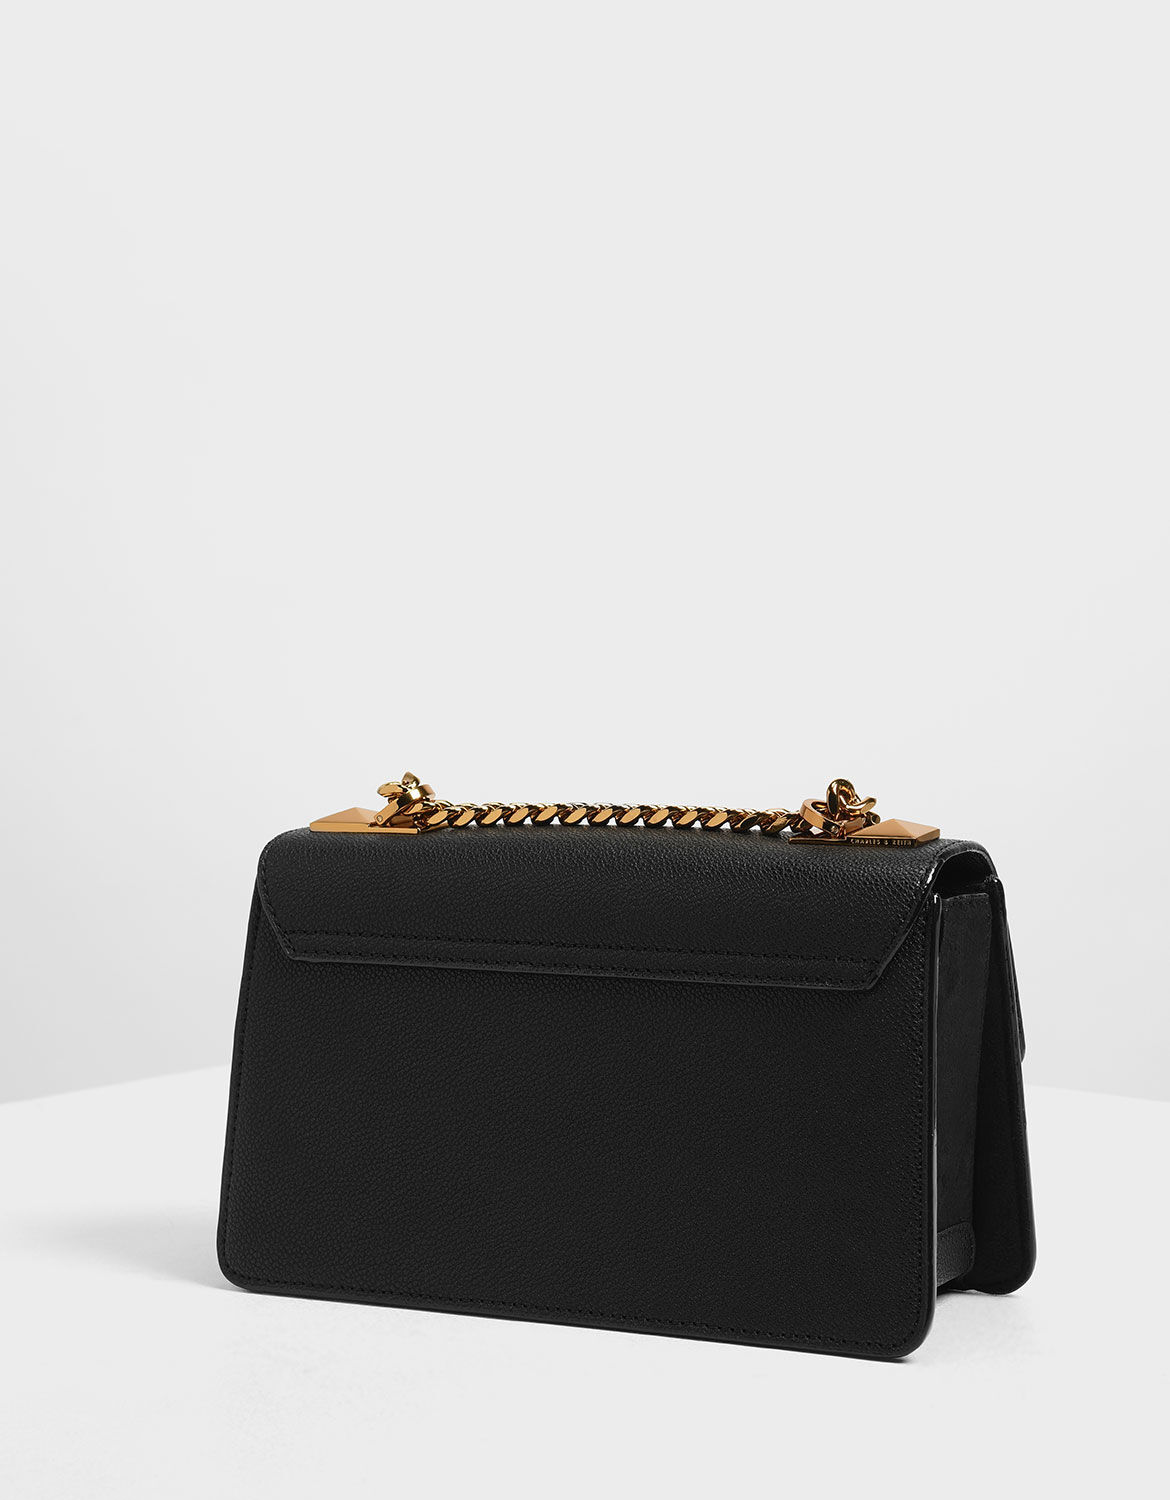 Shop Women's Crossbody Bags & Mini Bags | Exclusive Styles | CHARLES ...